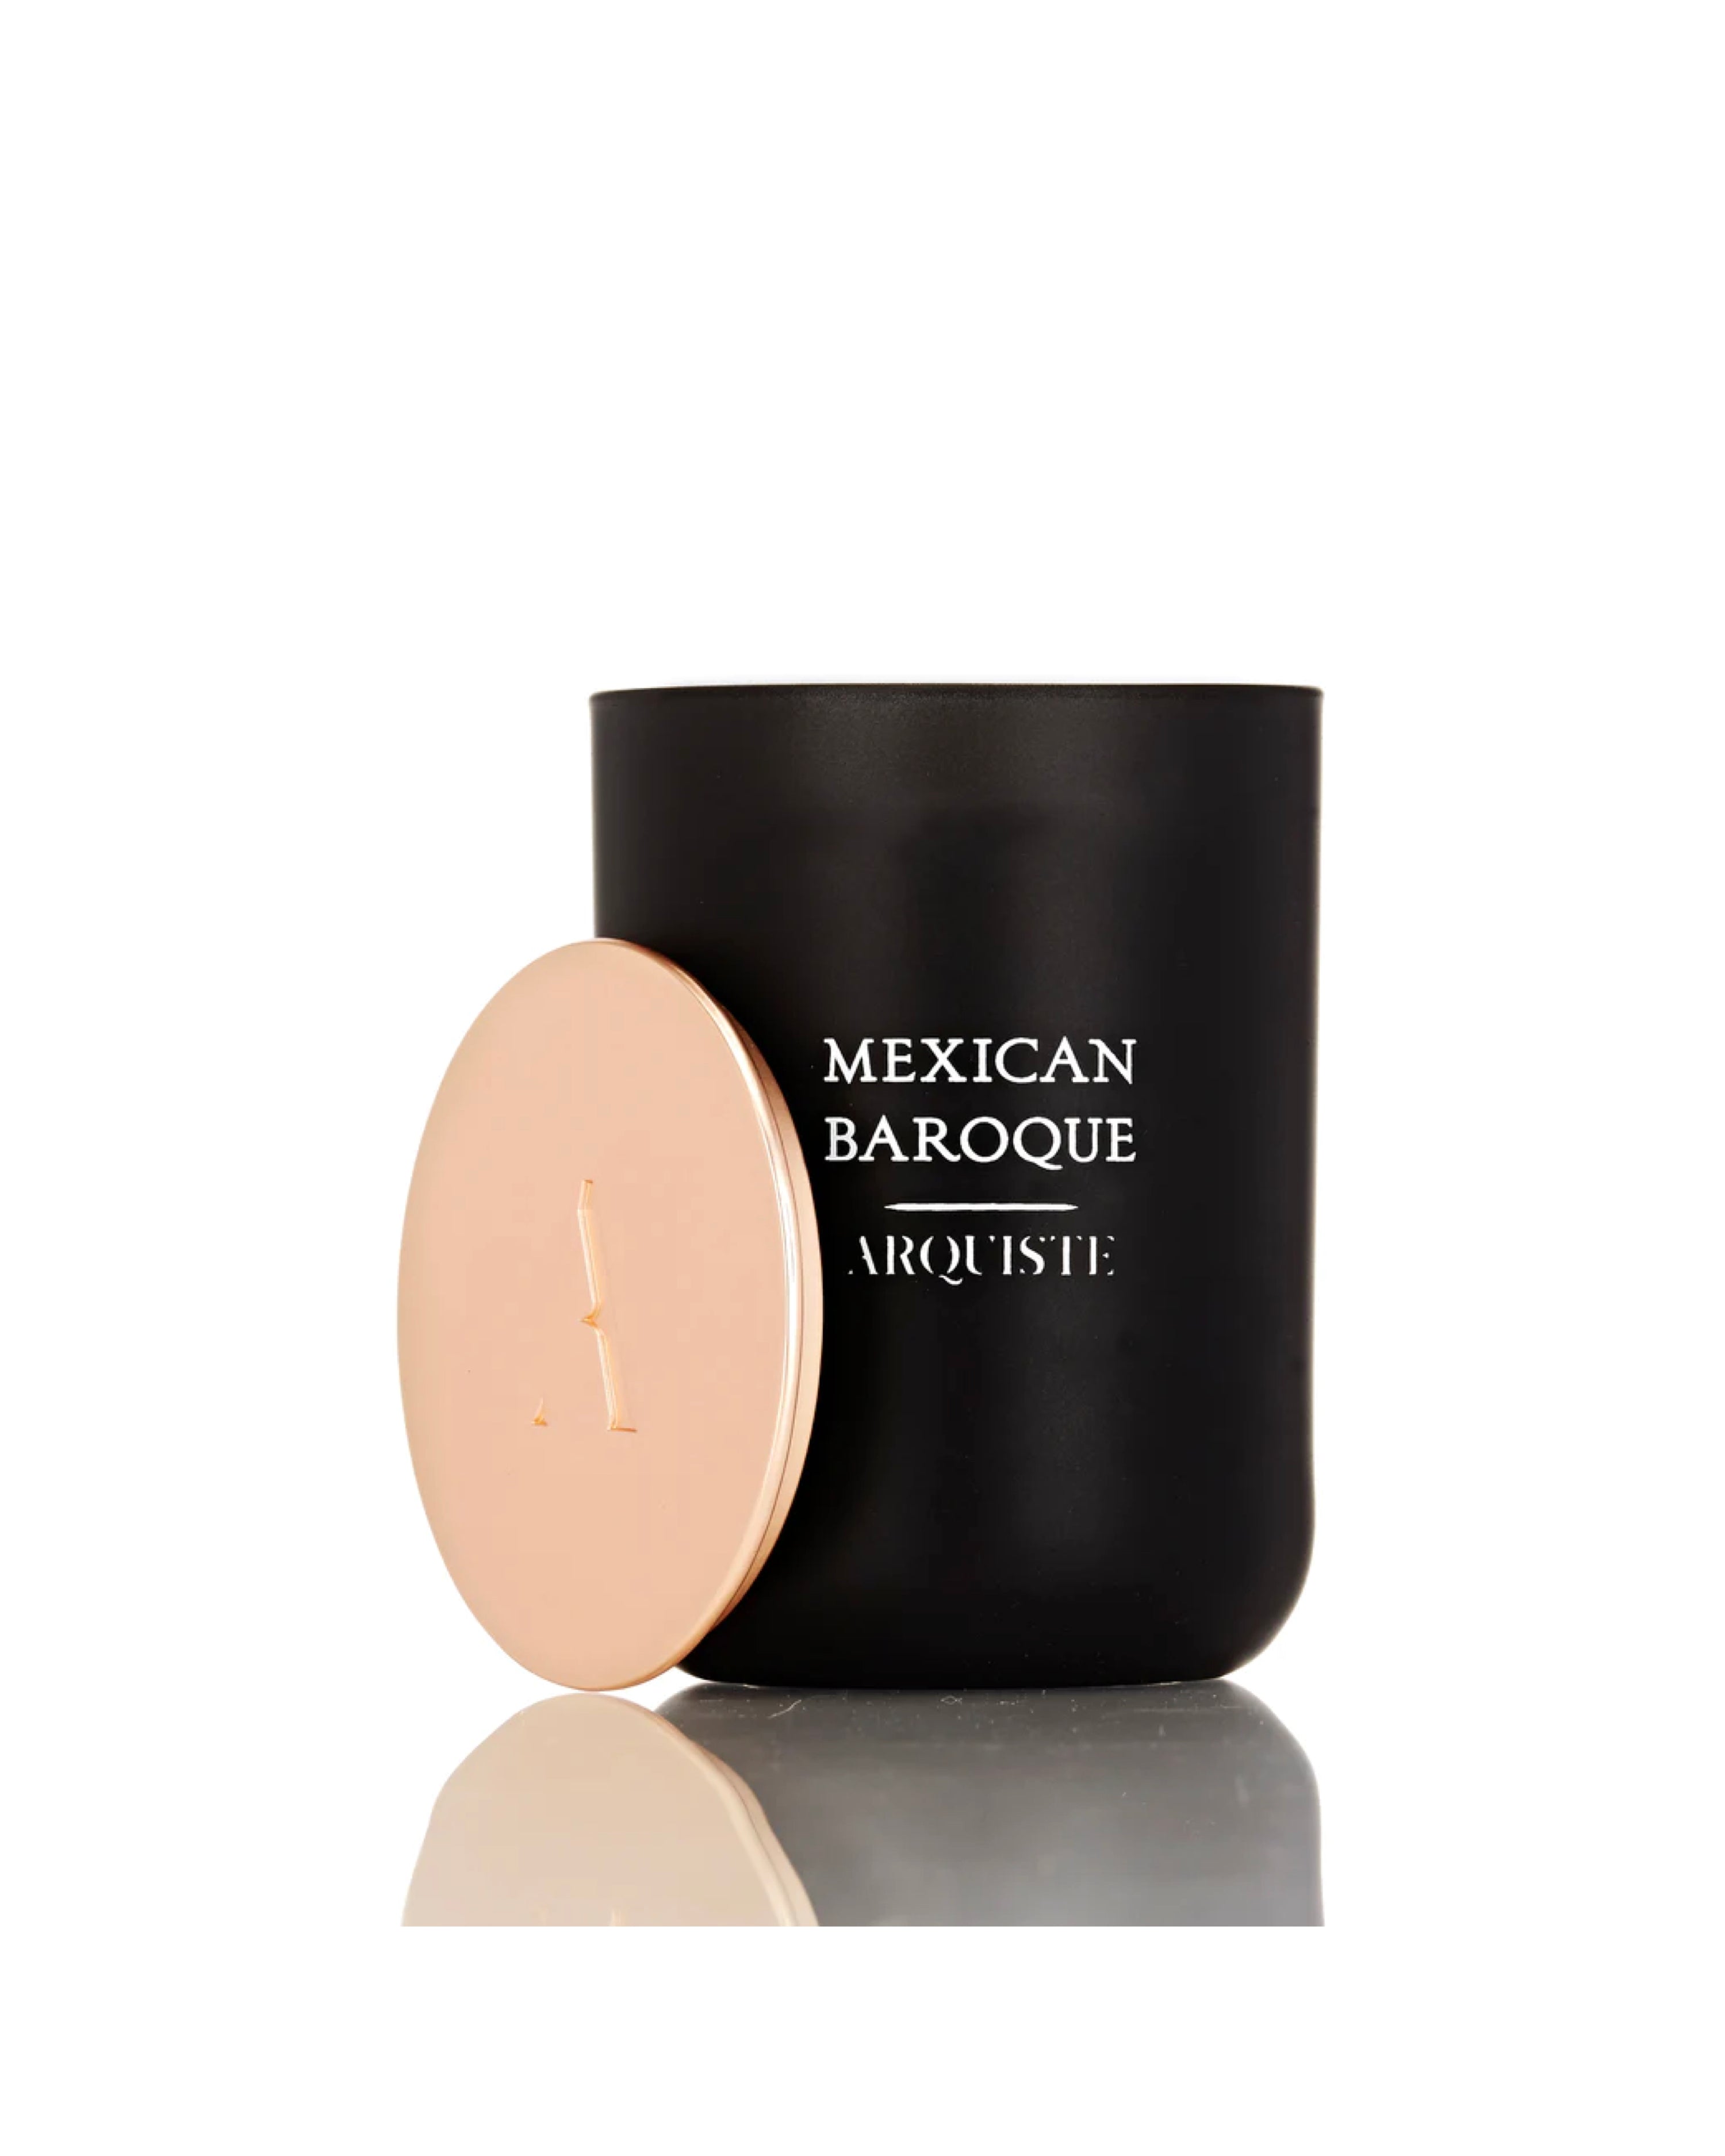 MEXICAN BAROQUE CANDLE